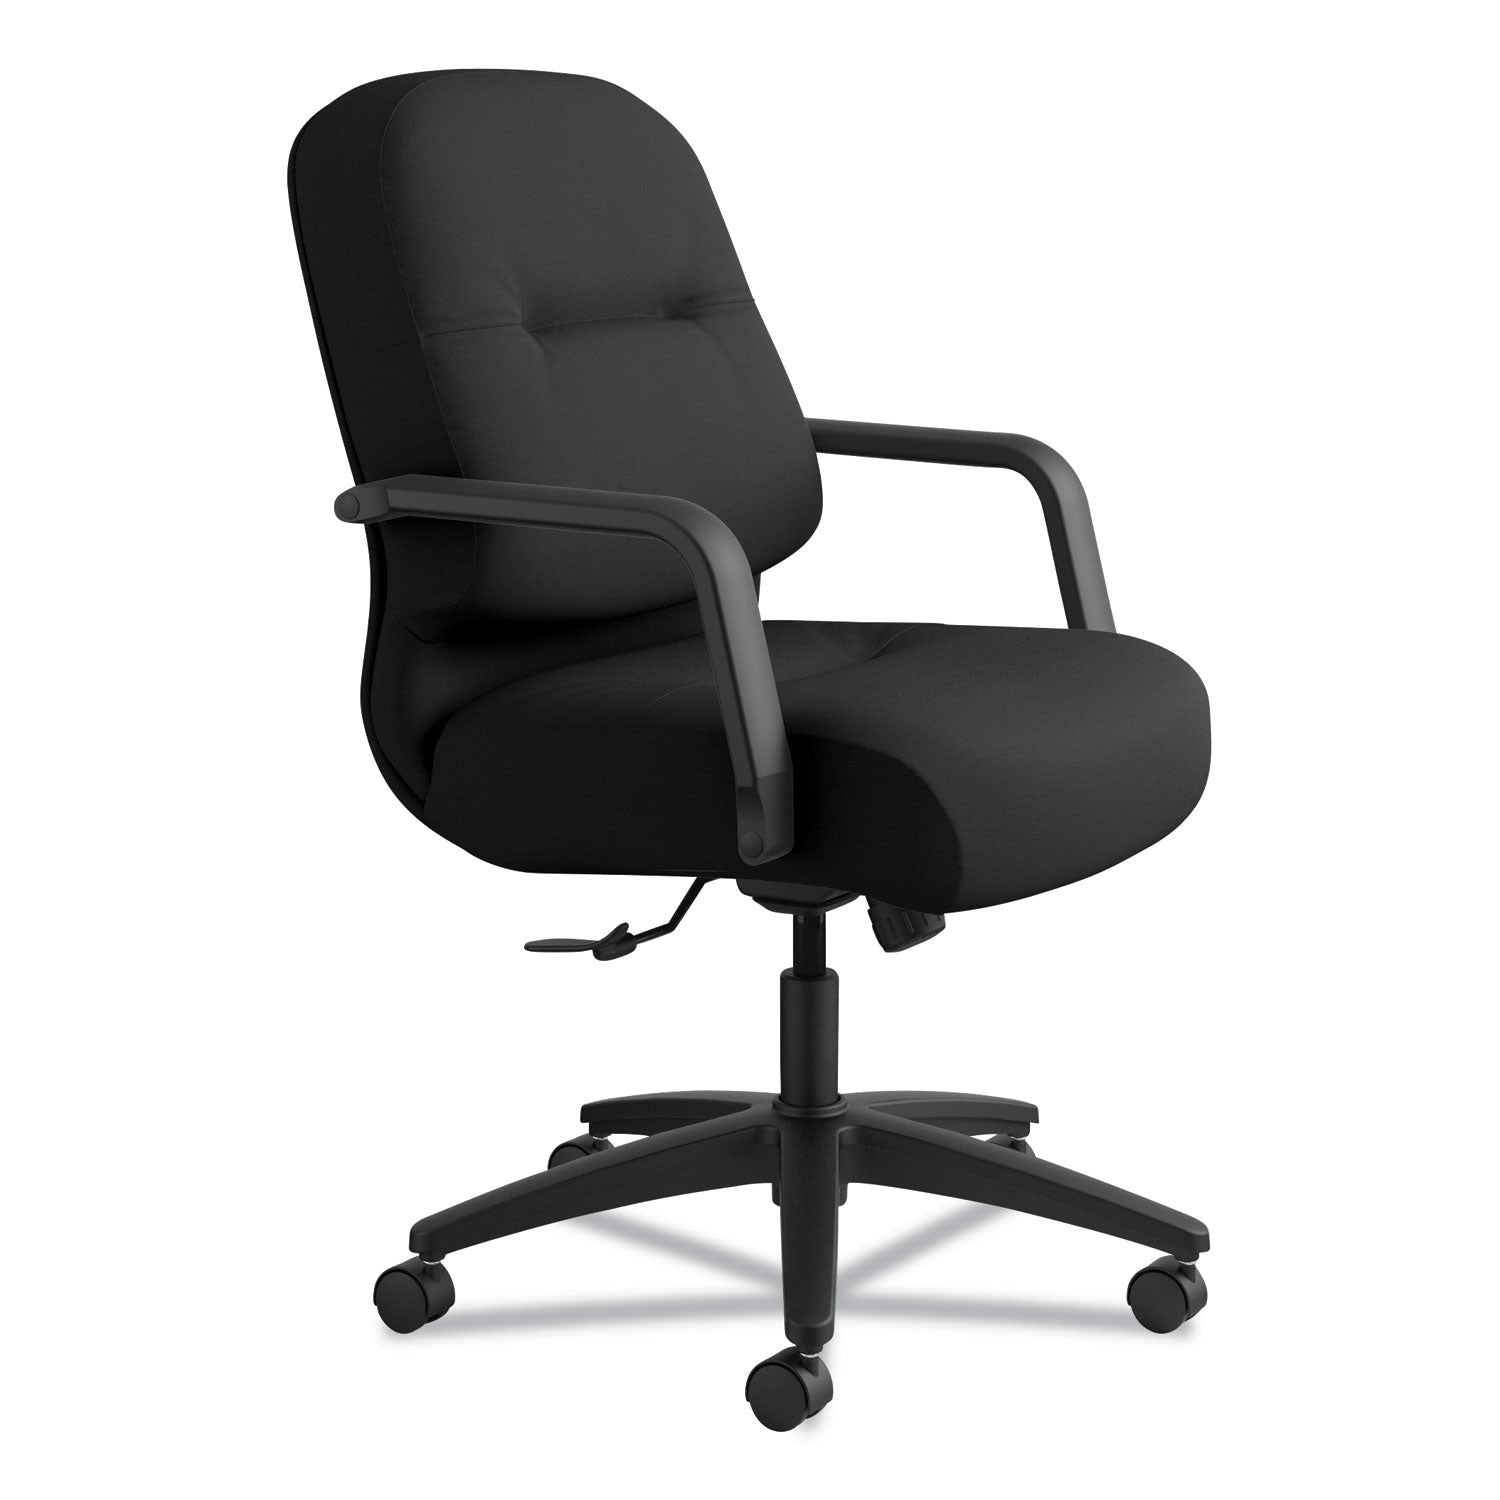 pillow-soft-2090-series-managerial-mid-back-swivel-tilt-chair-supports-up-to-300-lb-17-to-21-seat-height-black_hon2092cu10t - 2